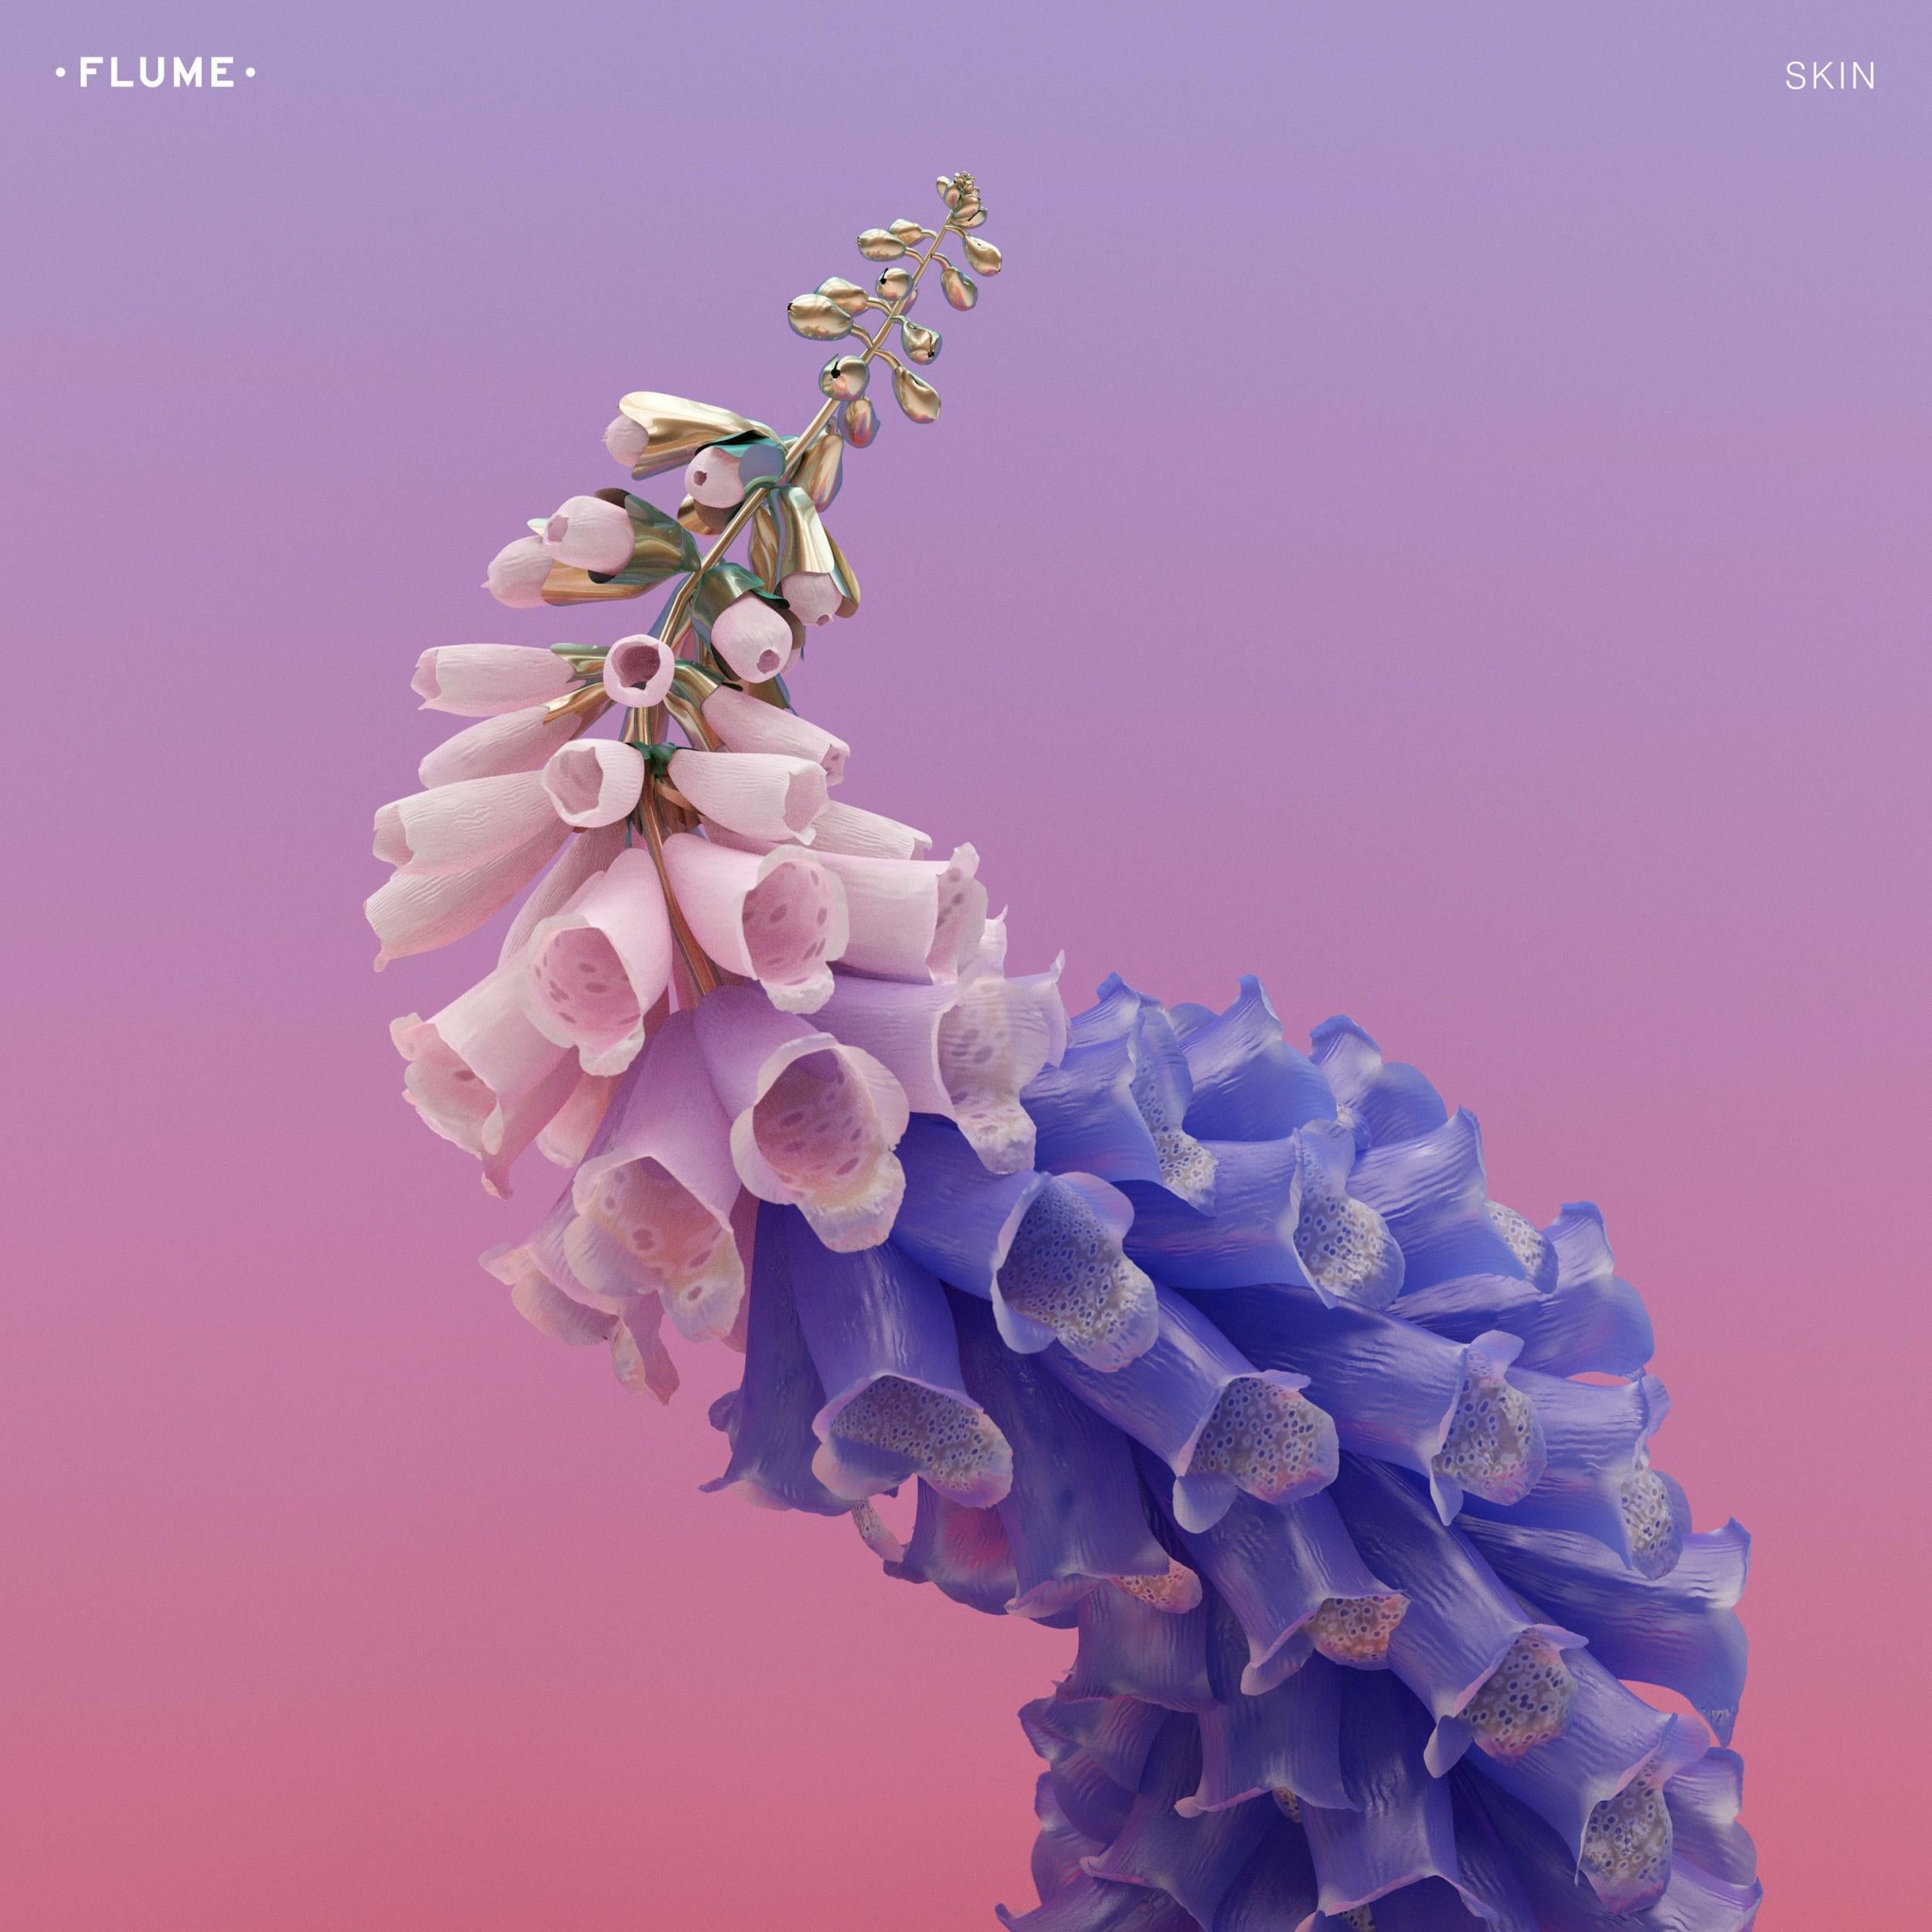 Flume's "Skin" is the audio equivalent of ecstasy Music